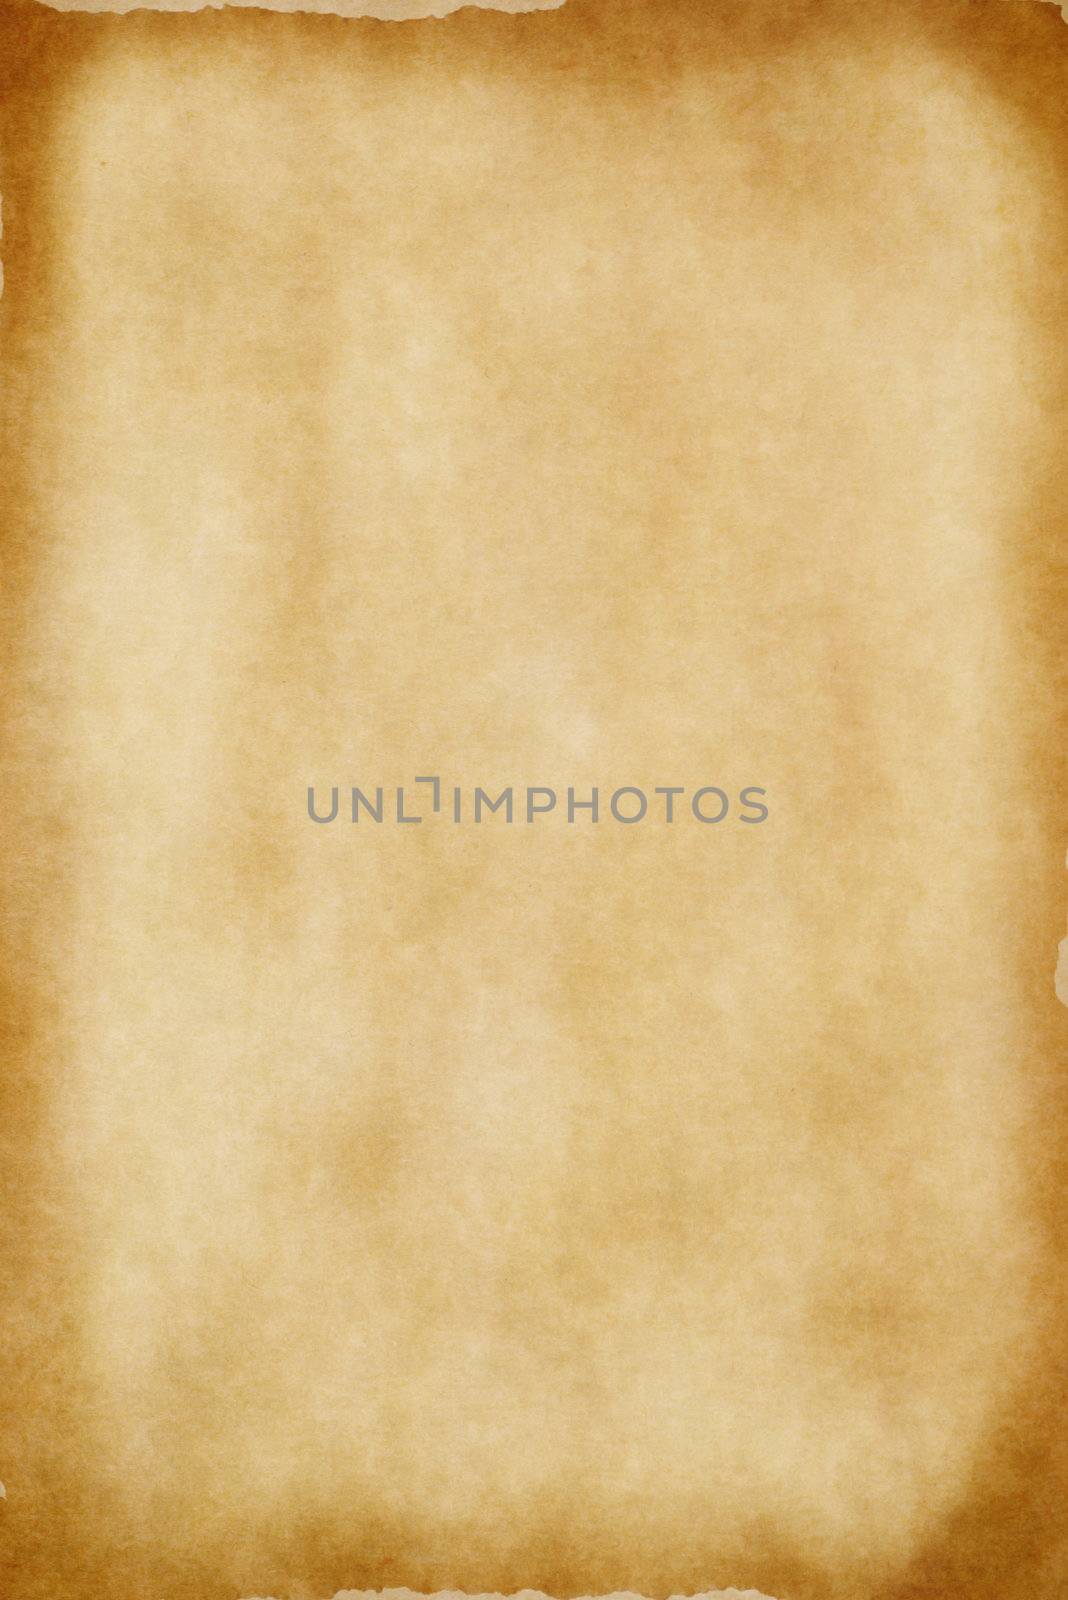 A sheet of yellowed. patchy parchment paper with darker, aged brown torn edges for background texture and copy space.